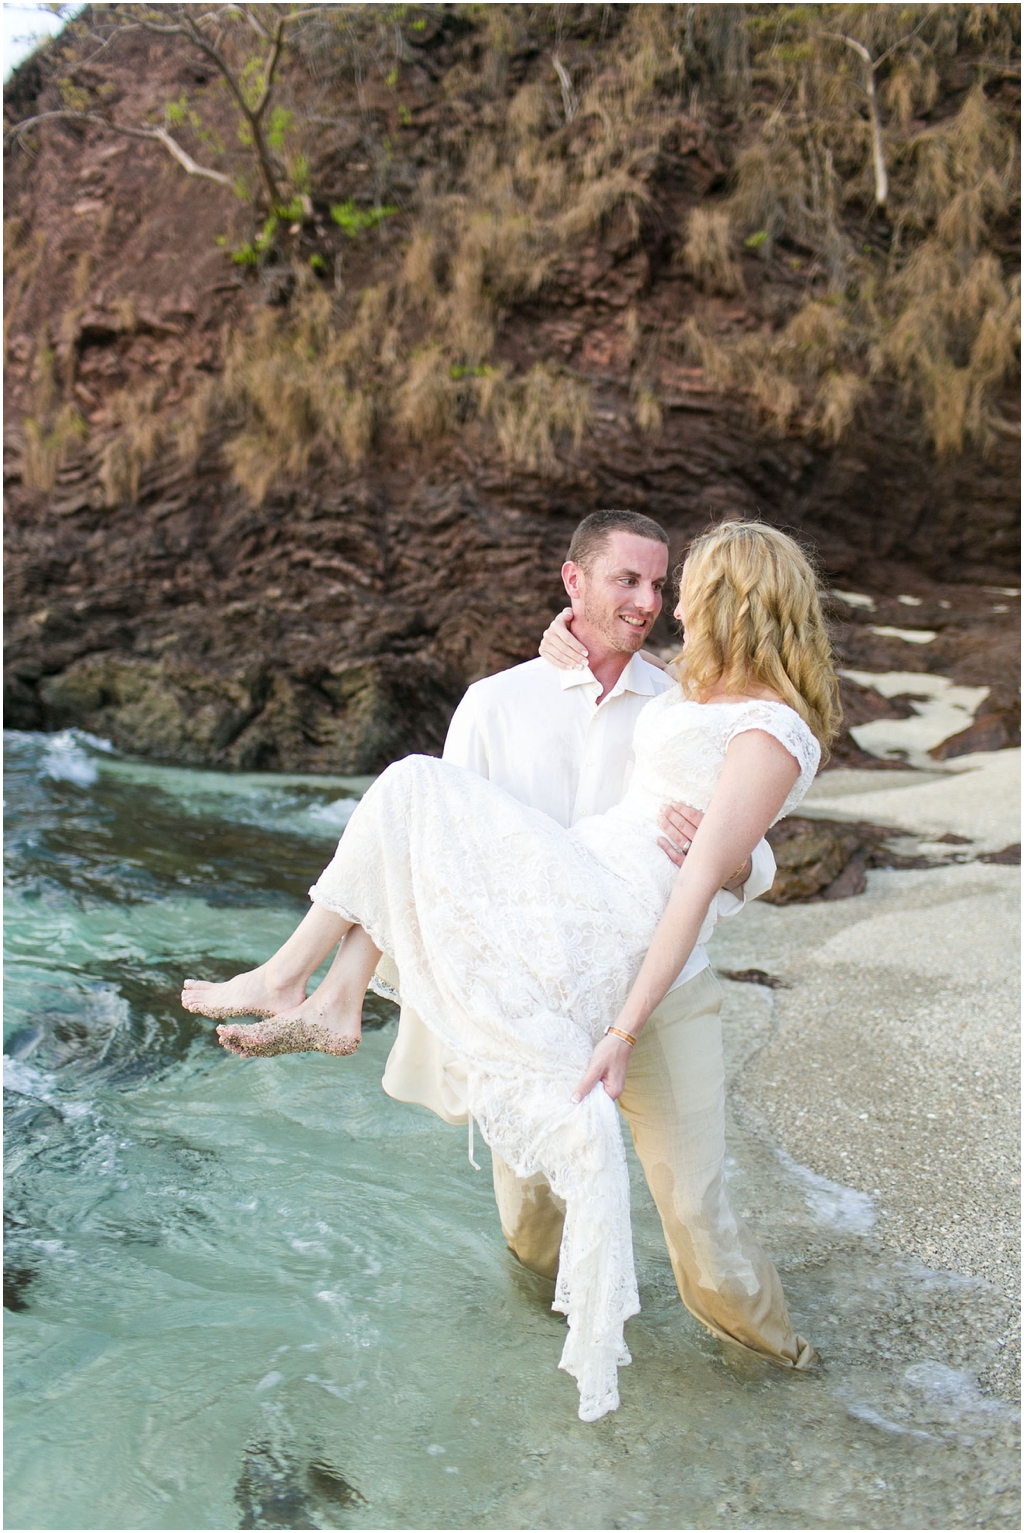 View More: http://maryfieldsphotography.pass.us/jackson-wedding-costarica